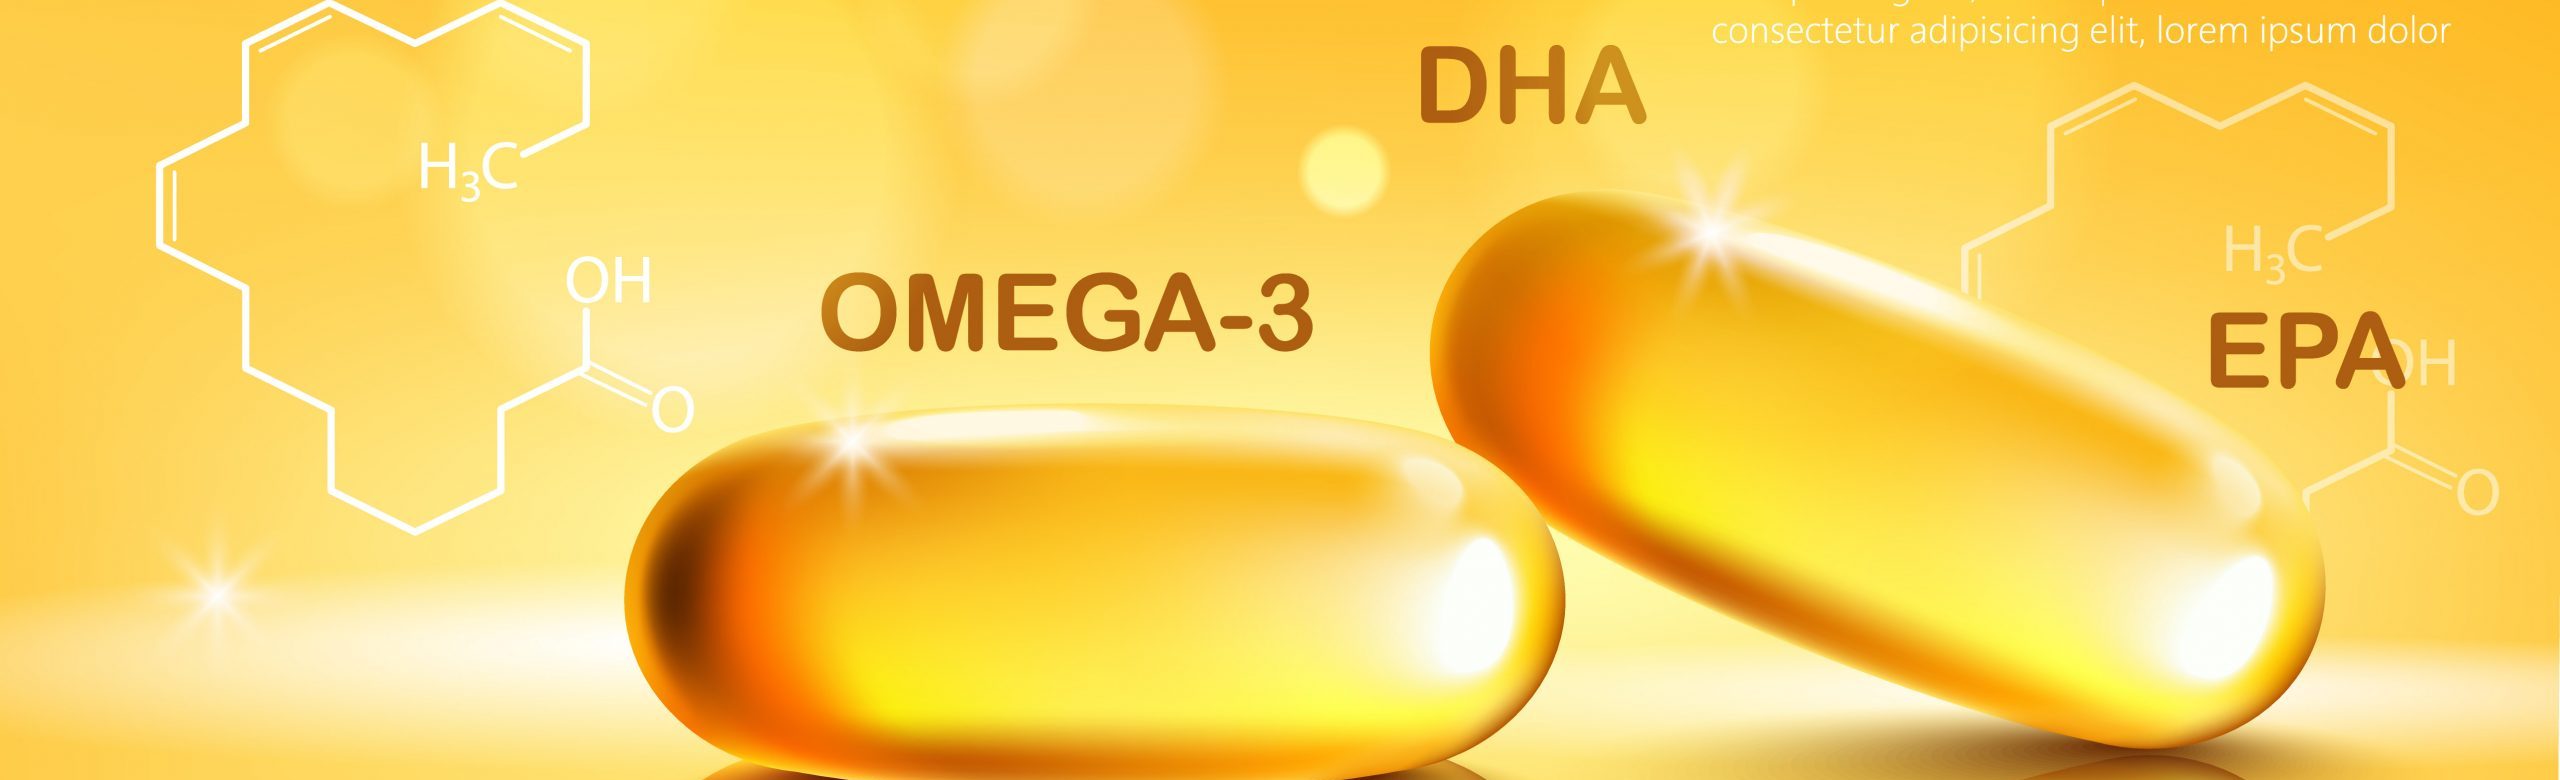 Omega 3 Fatty Acids: Are We Over Glorifying It?